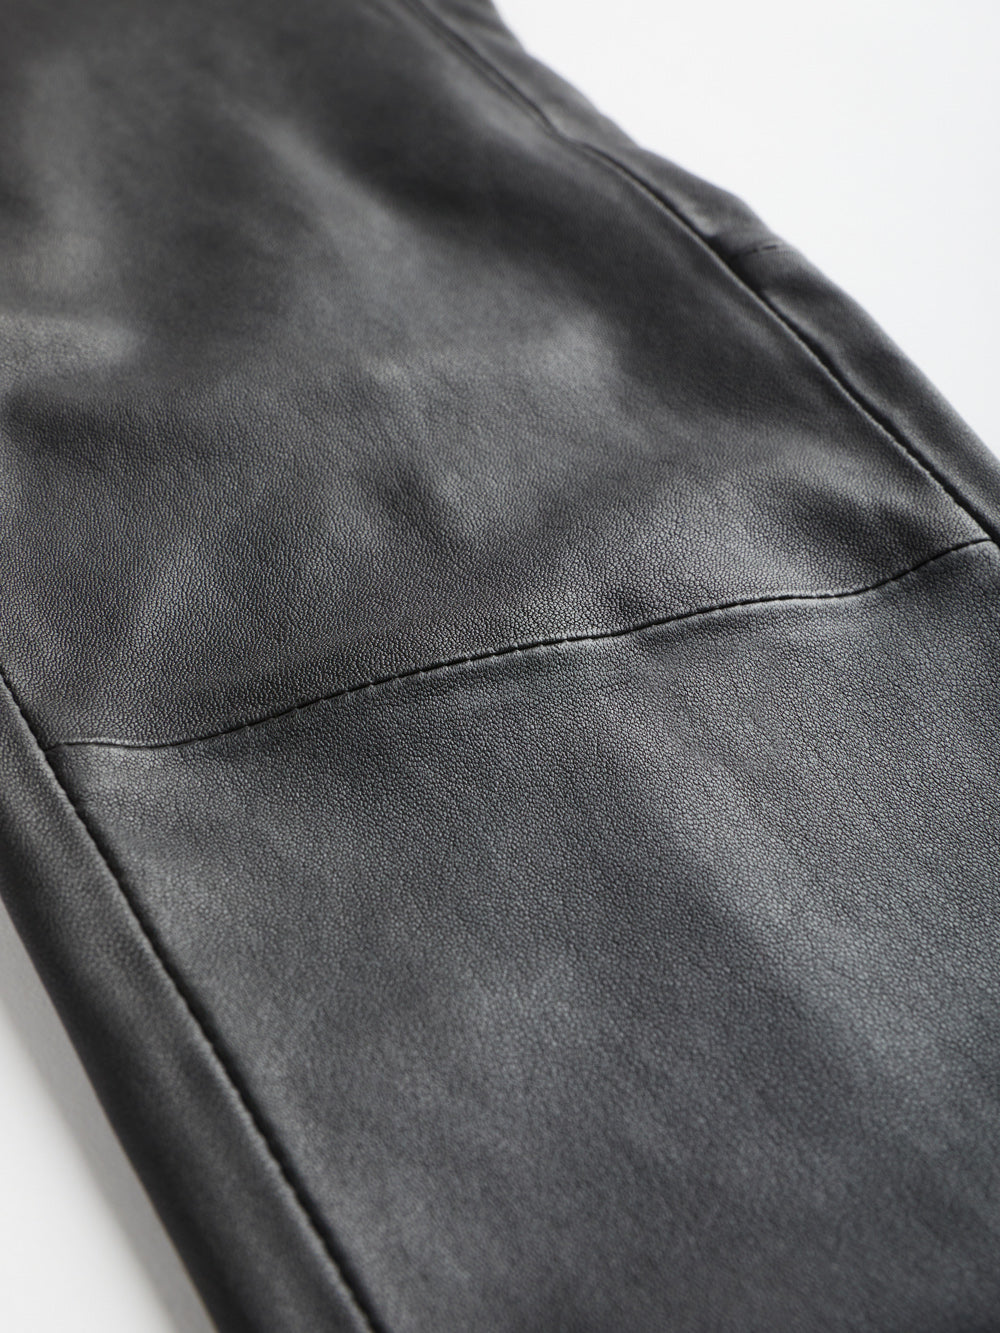 The Stretch Leather Pant